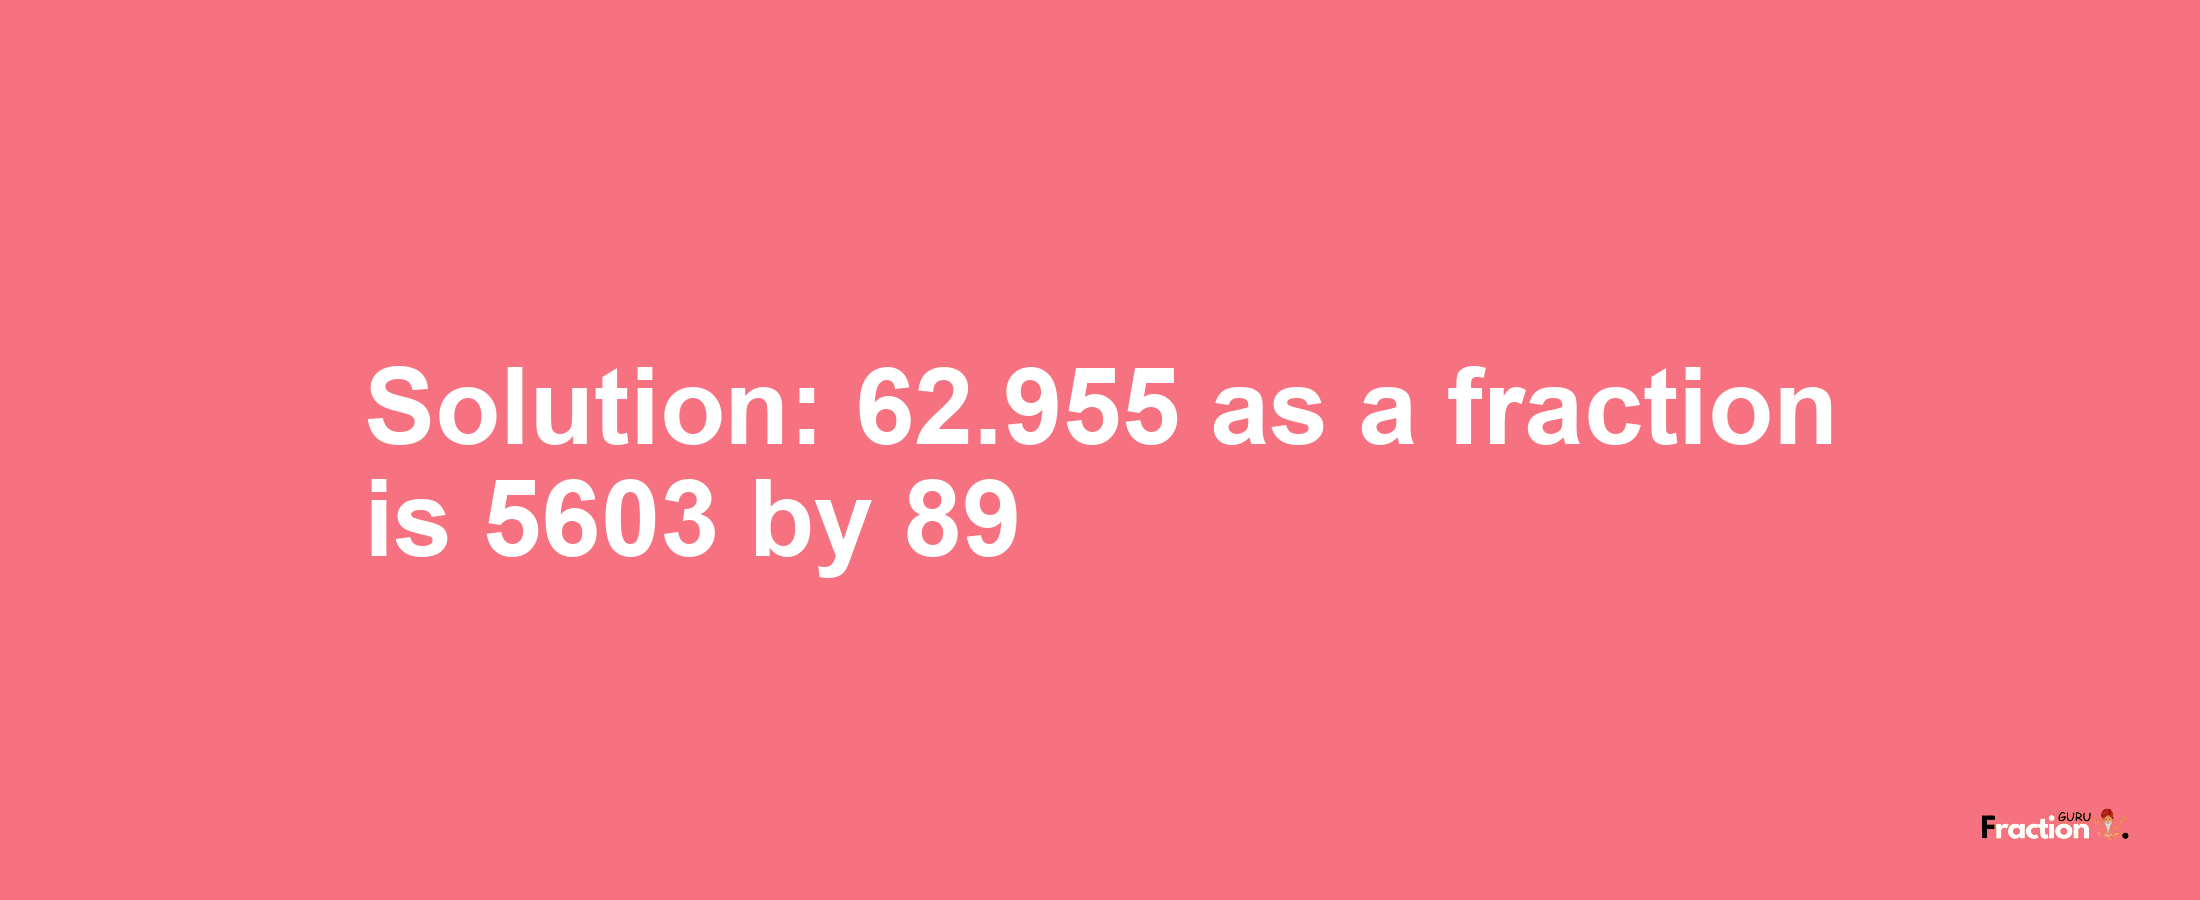 Solution:62.955 as a fraction is 5603/89